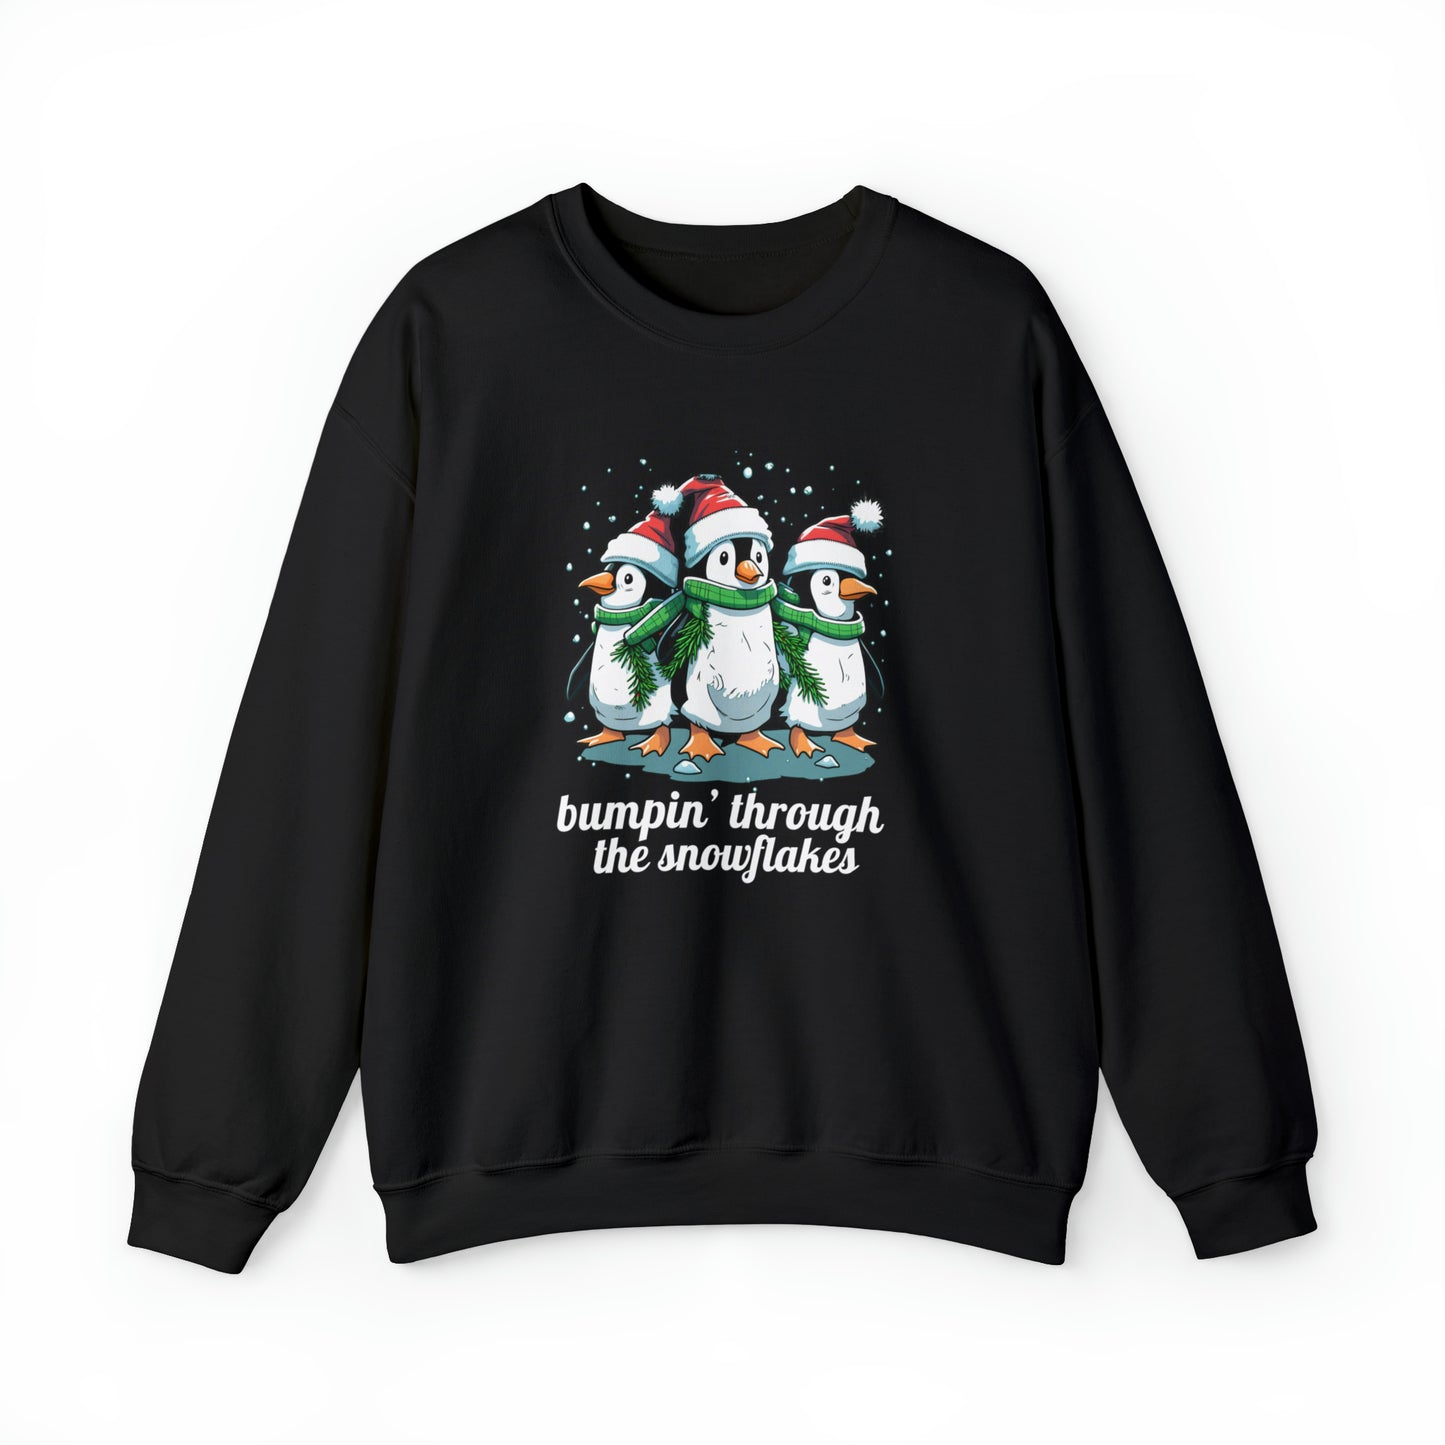 Funny Maternity Christmas Sweatshirt, Cute Pregnancy Winter Clothes, Cozy Penguin Pregnant Women Christmas Sweater, Holiday Baby Shower Gift